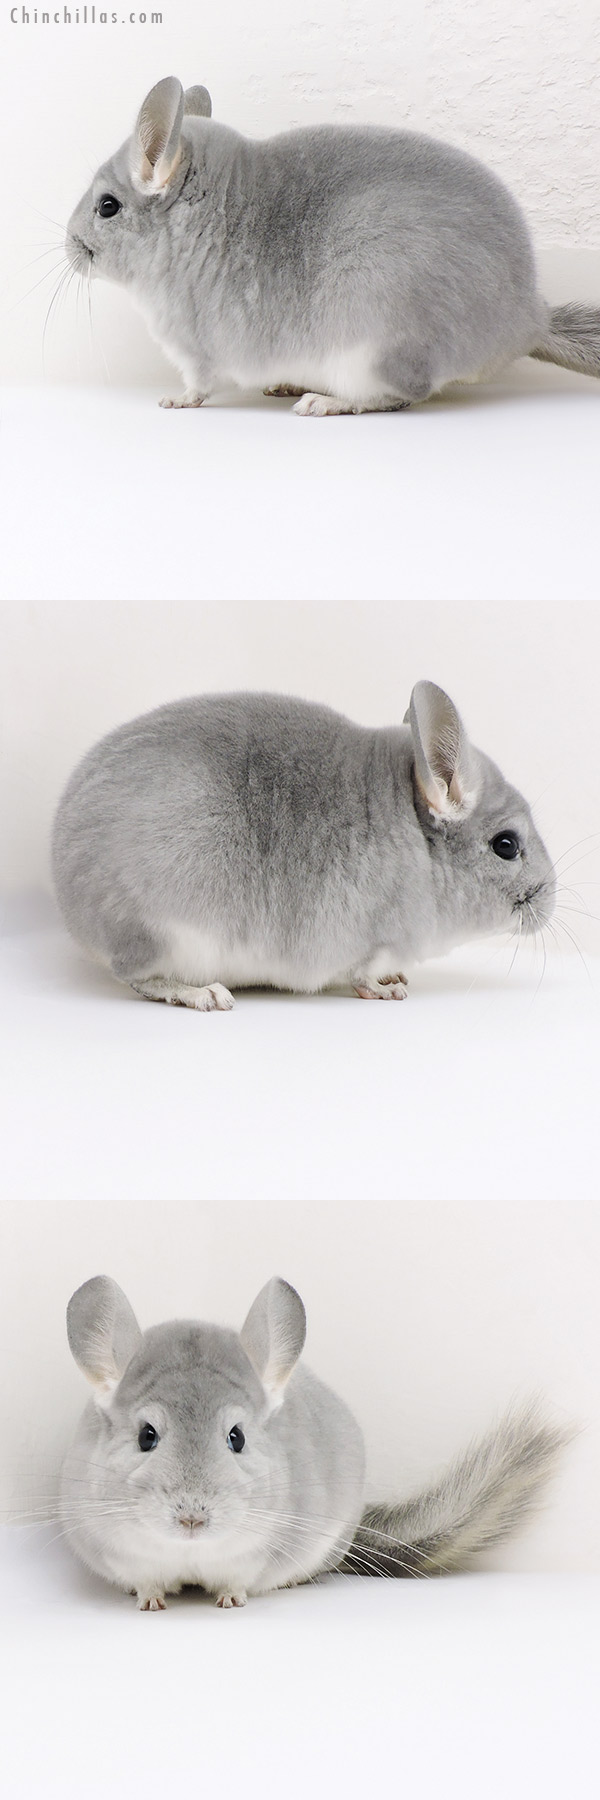 Chinchilla or related item offered for sale or export on Chinchillas.com - 18194 Show Quality Blue Diamond Female Chinchilla